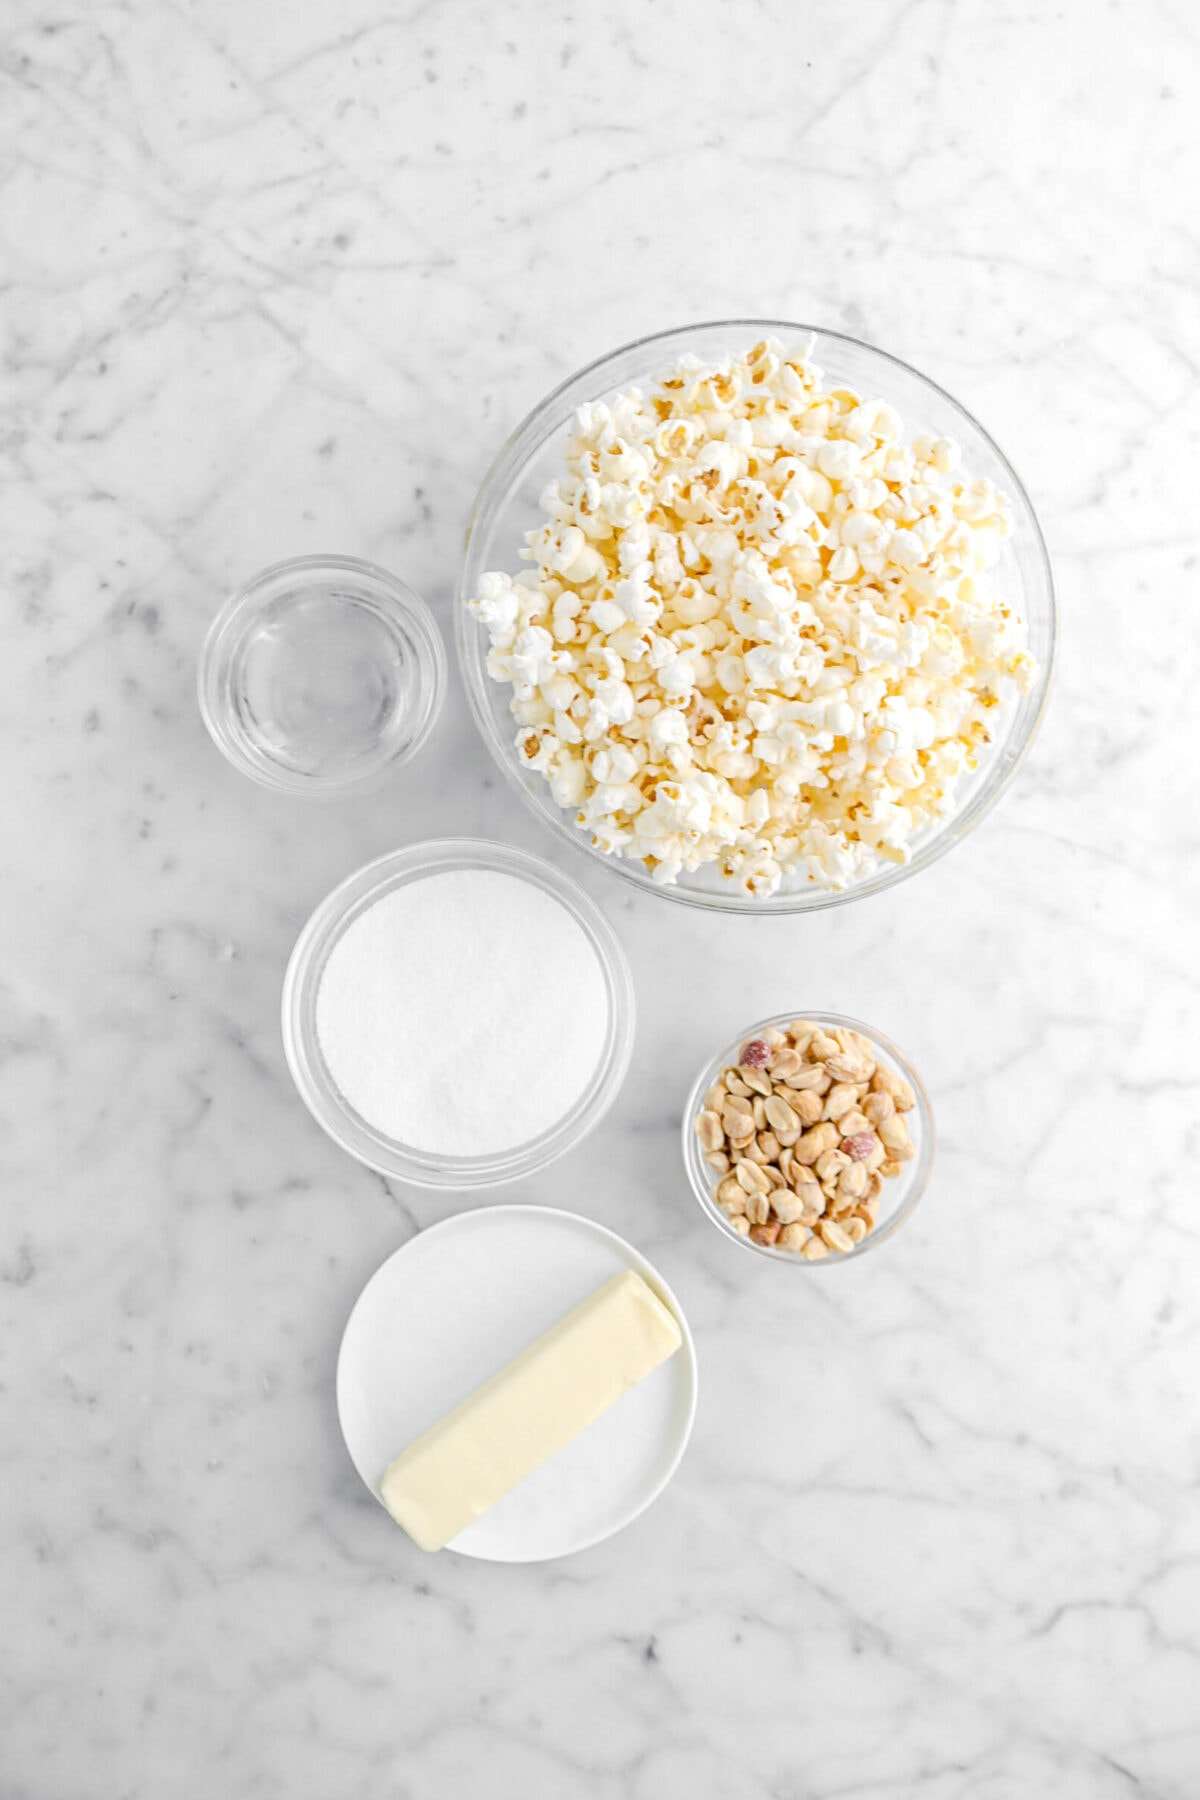 water, popcorn, sugar, peanuts, and butter on marble surface